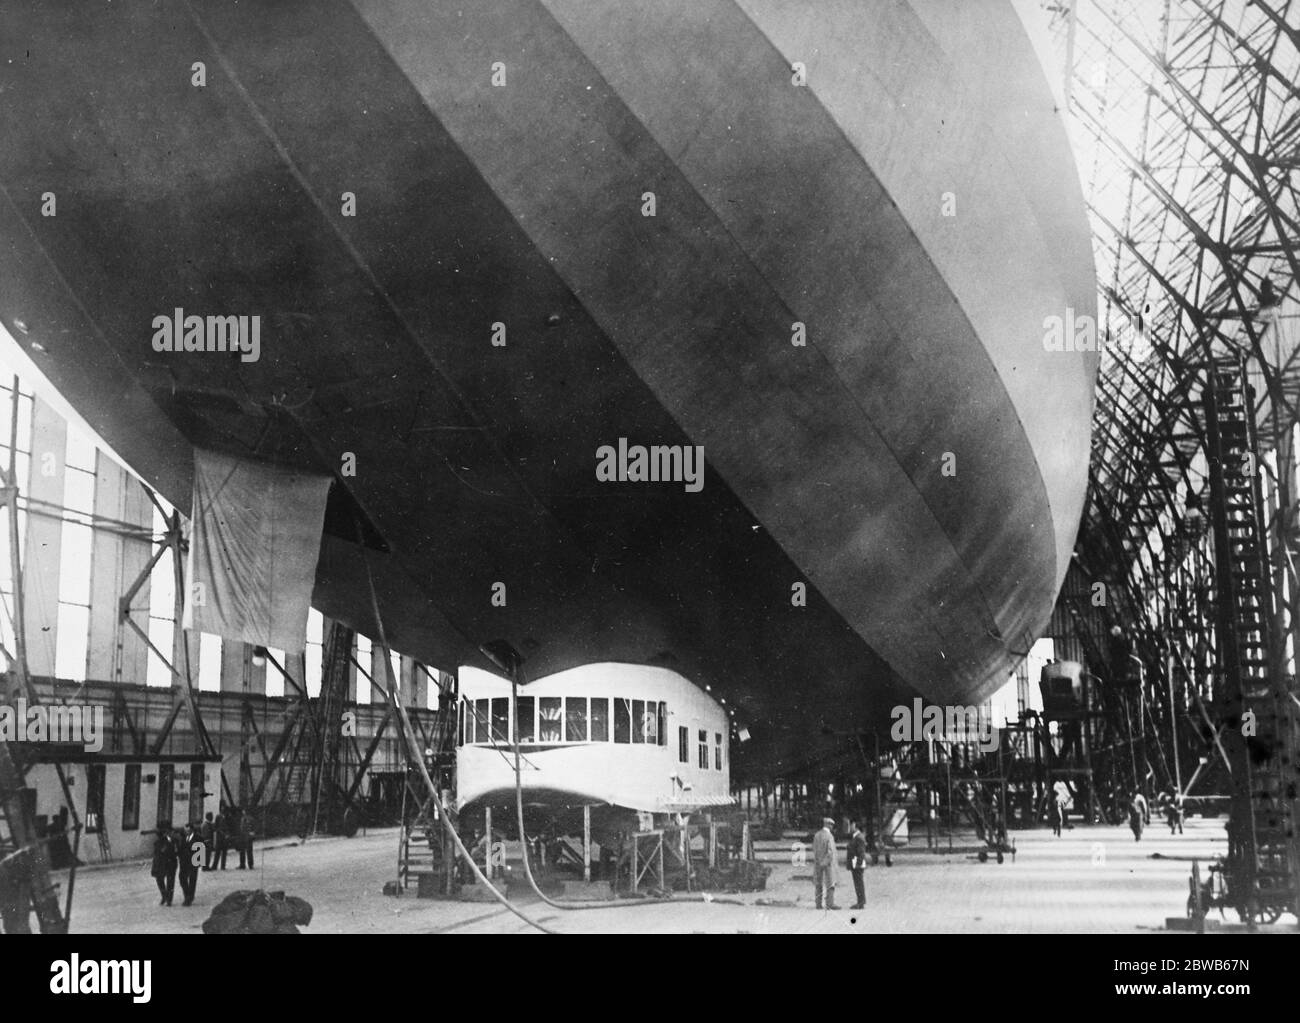 First photos of Zeppelin which will attempt to cross the Atlantic . Photo shows the complete ZR3 , the giant commercial zeppelin built for America at Friedrichshafen . This zeppelin which is constructed along semi - rigid lines will be used for commercial purposes . It is fitted with twenty sleeping compartments and has facilities for cooking and a heating plant for the comfort of the passengers . 26 August 1924 Stock Photo